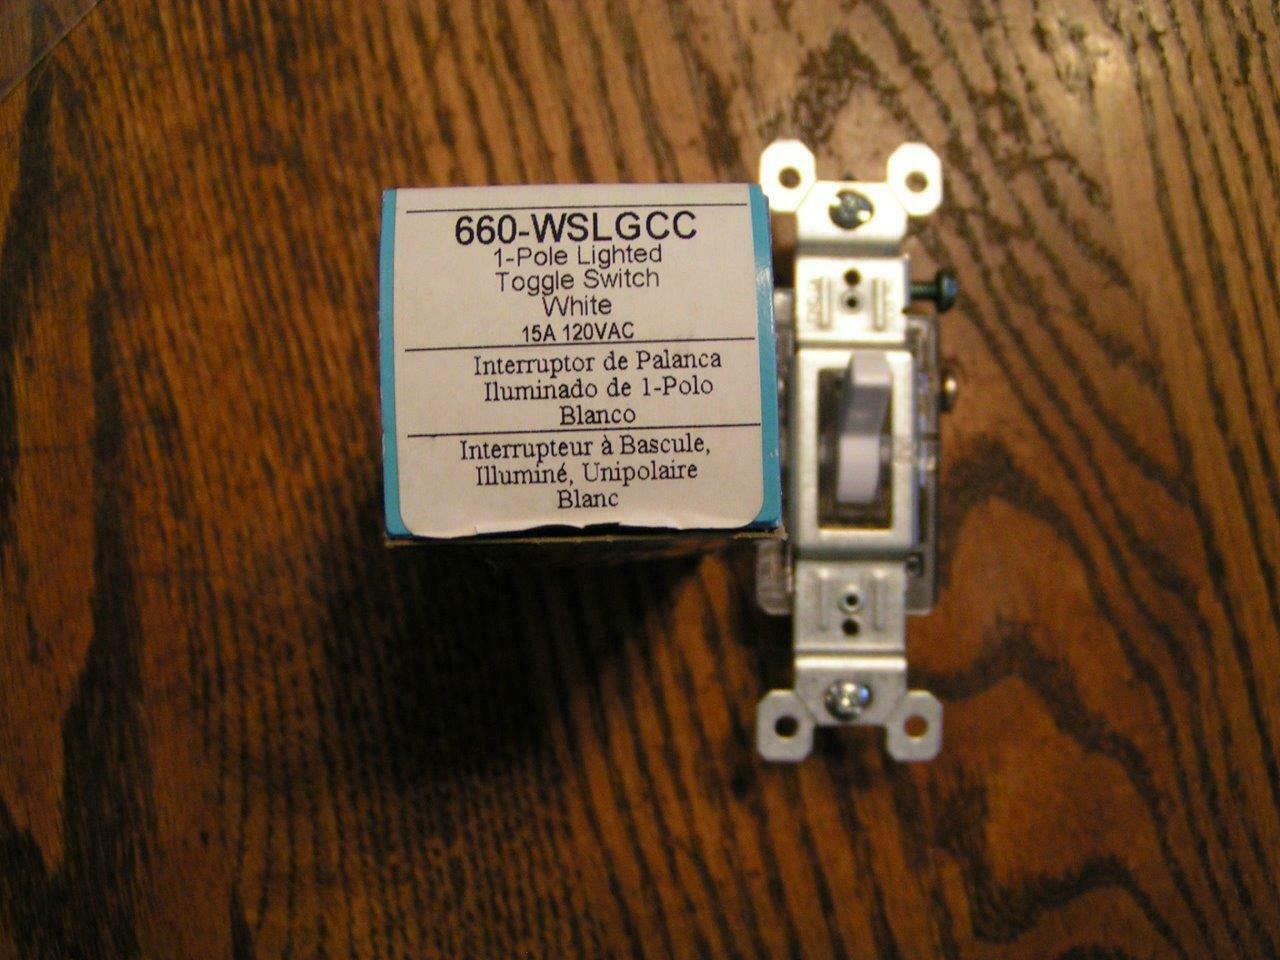 Primary image for 3 Switches Pass Seymour 660-WSLGCC  switch 15A 120VAC white  invE39